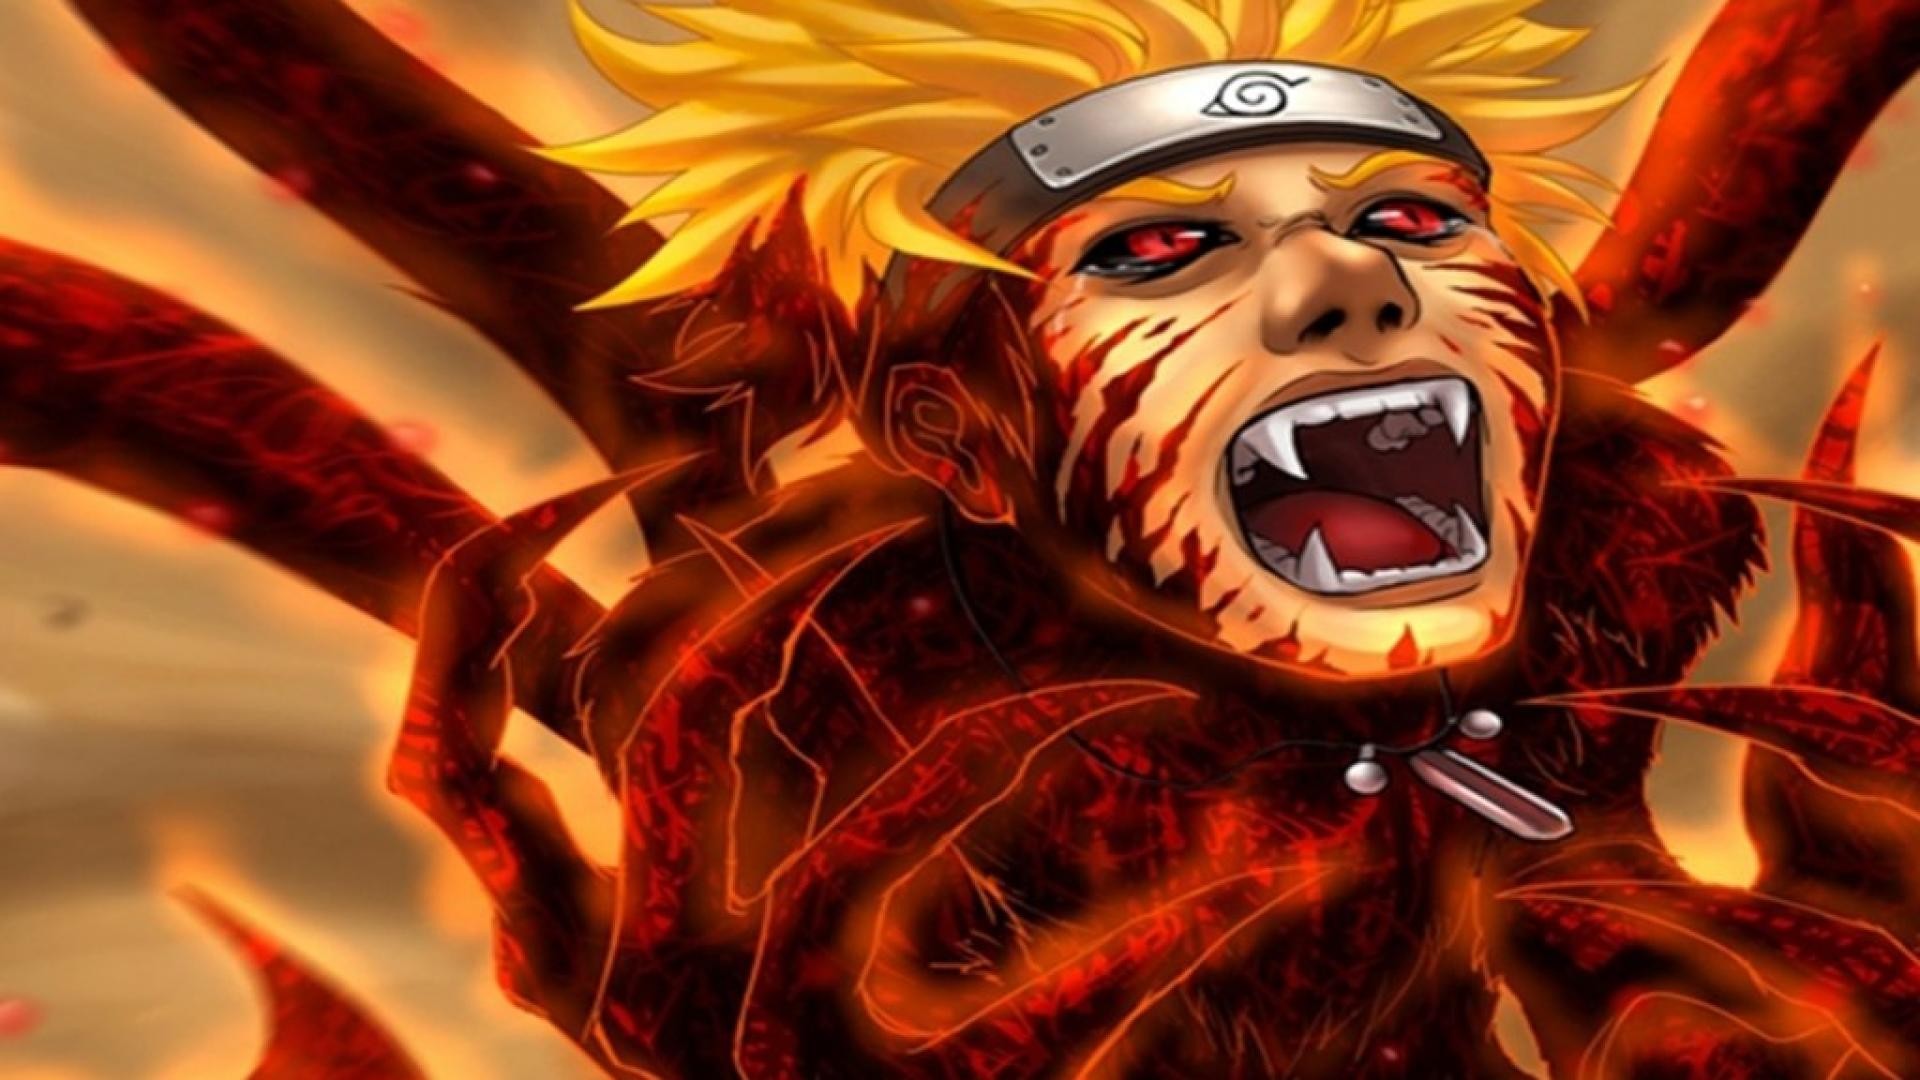 1920x1080 Naruto HD Wallpapers and Backgrounds